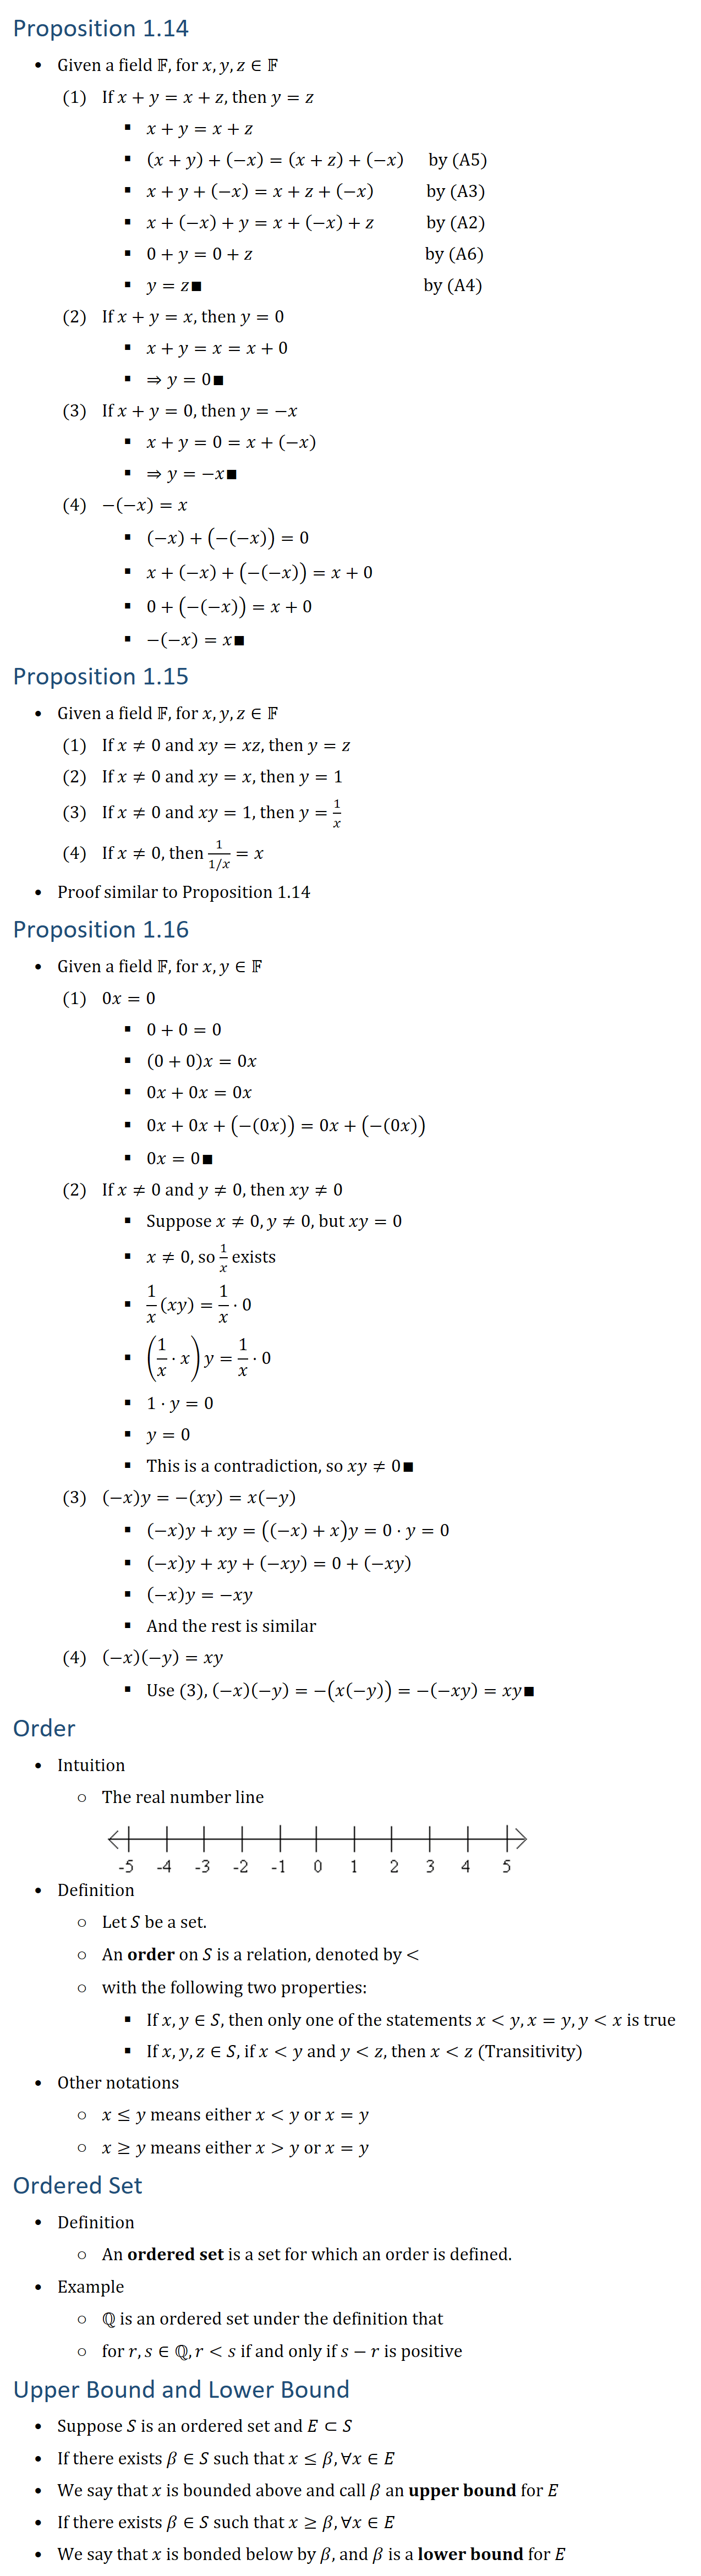 Proposition 1.14 • Given a field F, for x,y,z∈F (1) If x+y=x+z, then y=z (2) If x+y=x, then y=0 (3) If x+y=0, then y=−x (4) −(−x)=x • Proof (1) ○ x+y=x+z ○ (x+y)+(−x)=(x+z)+(−x) by (A5) ○ x+y+(−x)=x+z+(−x) by (A3) ○ x+(−x)+y=x+(−x)+z by (A2) ○ 0+y=0+z by (A6) ○ y=z∎ by (A4) • Proof (2) ○ x+y=x=x+0 ○ ⇒y=0∎ • Proof (3) ○ x+y=0=x+(−x) ○ ⇒y=−x∎ • Proof (4) ○ (−x)+(−(−x))=0 ○ x+(−x)+(−(−x))=x+0 ○ 0+(−(−x))=x+0 ○ −(−x)=x∎ Proposition 1.15 • Given a field F, for x,y,z∈F (1) If x≠0 and xy=xz, then y=z (2) If x≠0 and xy=x, then y=1 (3) If x≠0 and xy=1, then y=1/x (4) If x≠0, then 1/(1/x)=x • Proof similar to Proposition 1.14 Proposition 1.16 • Given a field F, for x,y∈F (1) 0x=0 (2) If x≠0 and y≠0, then xy≠0 (3) (−x)y=−(xy)=x(−y) (4) (−x)(−y)=xy • Proof (1) ○ 0+0=0 ○ (0+0)x=0x ○ 0x+0x=0x ○ 0x+0x+(−(0x))=0x+(−(0x)) ○ 0x=0∎ • Proof (2) ○ Suppose x≠0, y≠0, but xy=0 ○ x≠0, so 1/x exists ○ 1/x (xy)=1/x⋅0 ○ (1/x⋅x)y=1/x⋅0 ○ 1⋅y=0 ○ y=0 ○ This is a contradiction, so xy≠0∎ • Proof (3) ○ (−x)y+xy=((−x)+x)y=0⋅y=0 ○ (−x)y+xy+(−xy)=0+(−xy) ○ (−x)y=−xy ○ And the rest is similar • Proof (4) ○ Use (3), (−x)(−y)=−(x(−y))=−(−xy)=xy∎ Order • Intuition ○ The real number line • Definition ○ Let S be a set. ○ An order on S is a relation, denoted by ,with the following two properties: § If x∈S and y∈S, then one and only one of the statements xy, x=y, yx is true § If x,y,z∈S, if xy and yz, then xz (Transitivity) ○ x≤y means either xy or x=y ○ x≥y means either xy or x=y ○ An ordered set is a set for which an order is defined. • Example ○ Q is an ordered set under the definition that ○ For r,s∈Q, rs, if and only if s−r is positive Upper Bound and Lower Bound • Definition ○ Suppose S is an ordered set and E⊂S. ○ If there exists β∈S such that x≤β, ∀x∈E ○ We say that x is bounded above and call β an upper bound for E ○ Similarly, if x≥β, ∀x∈E. ○ We say that x is bonded below by β, and β is a lower bound for E 